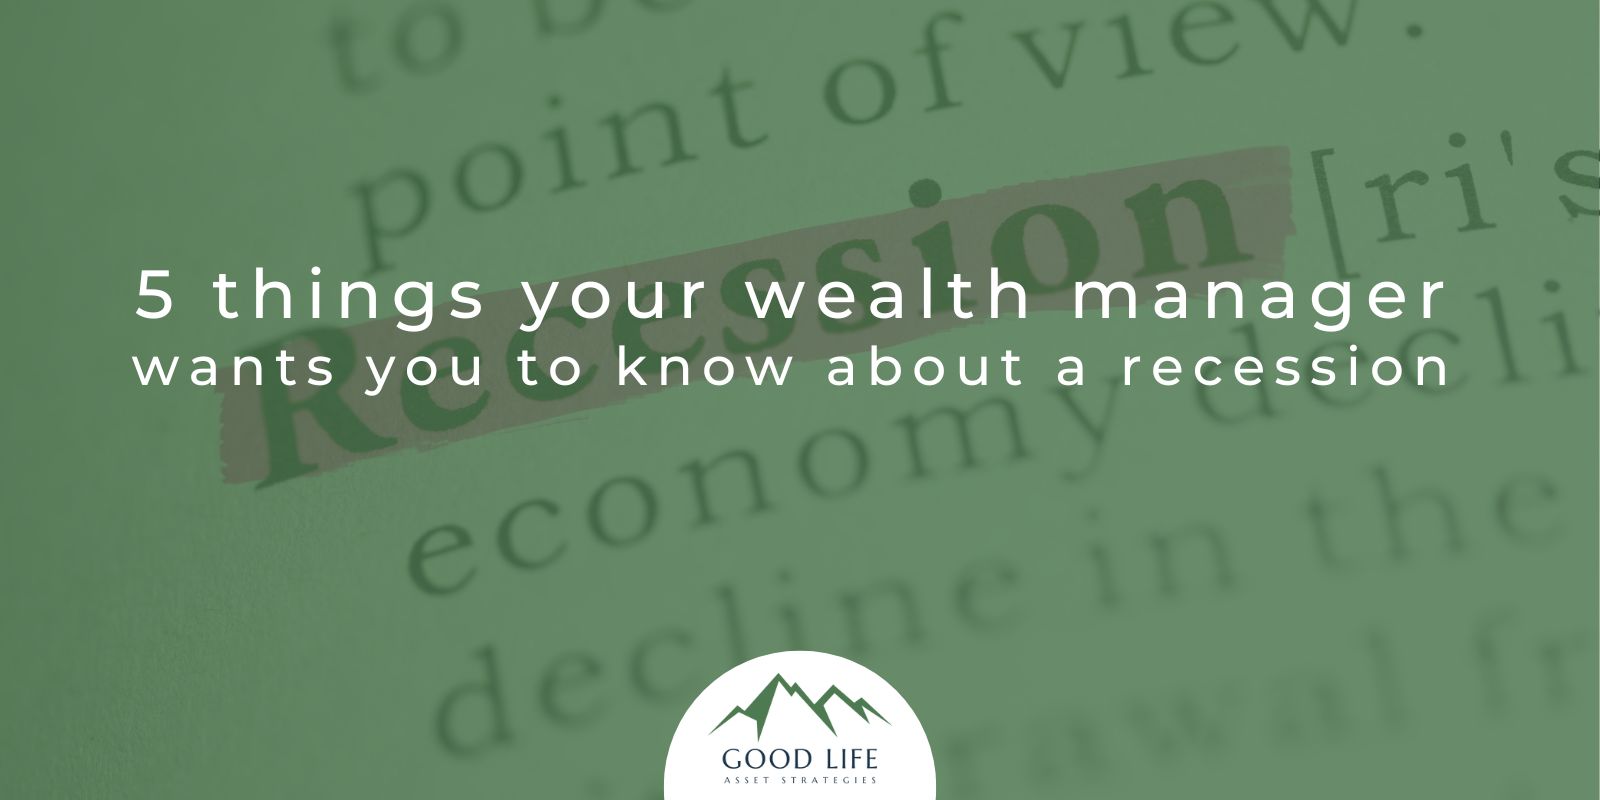 Wealth manager advice for recession